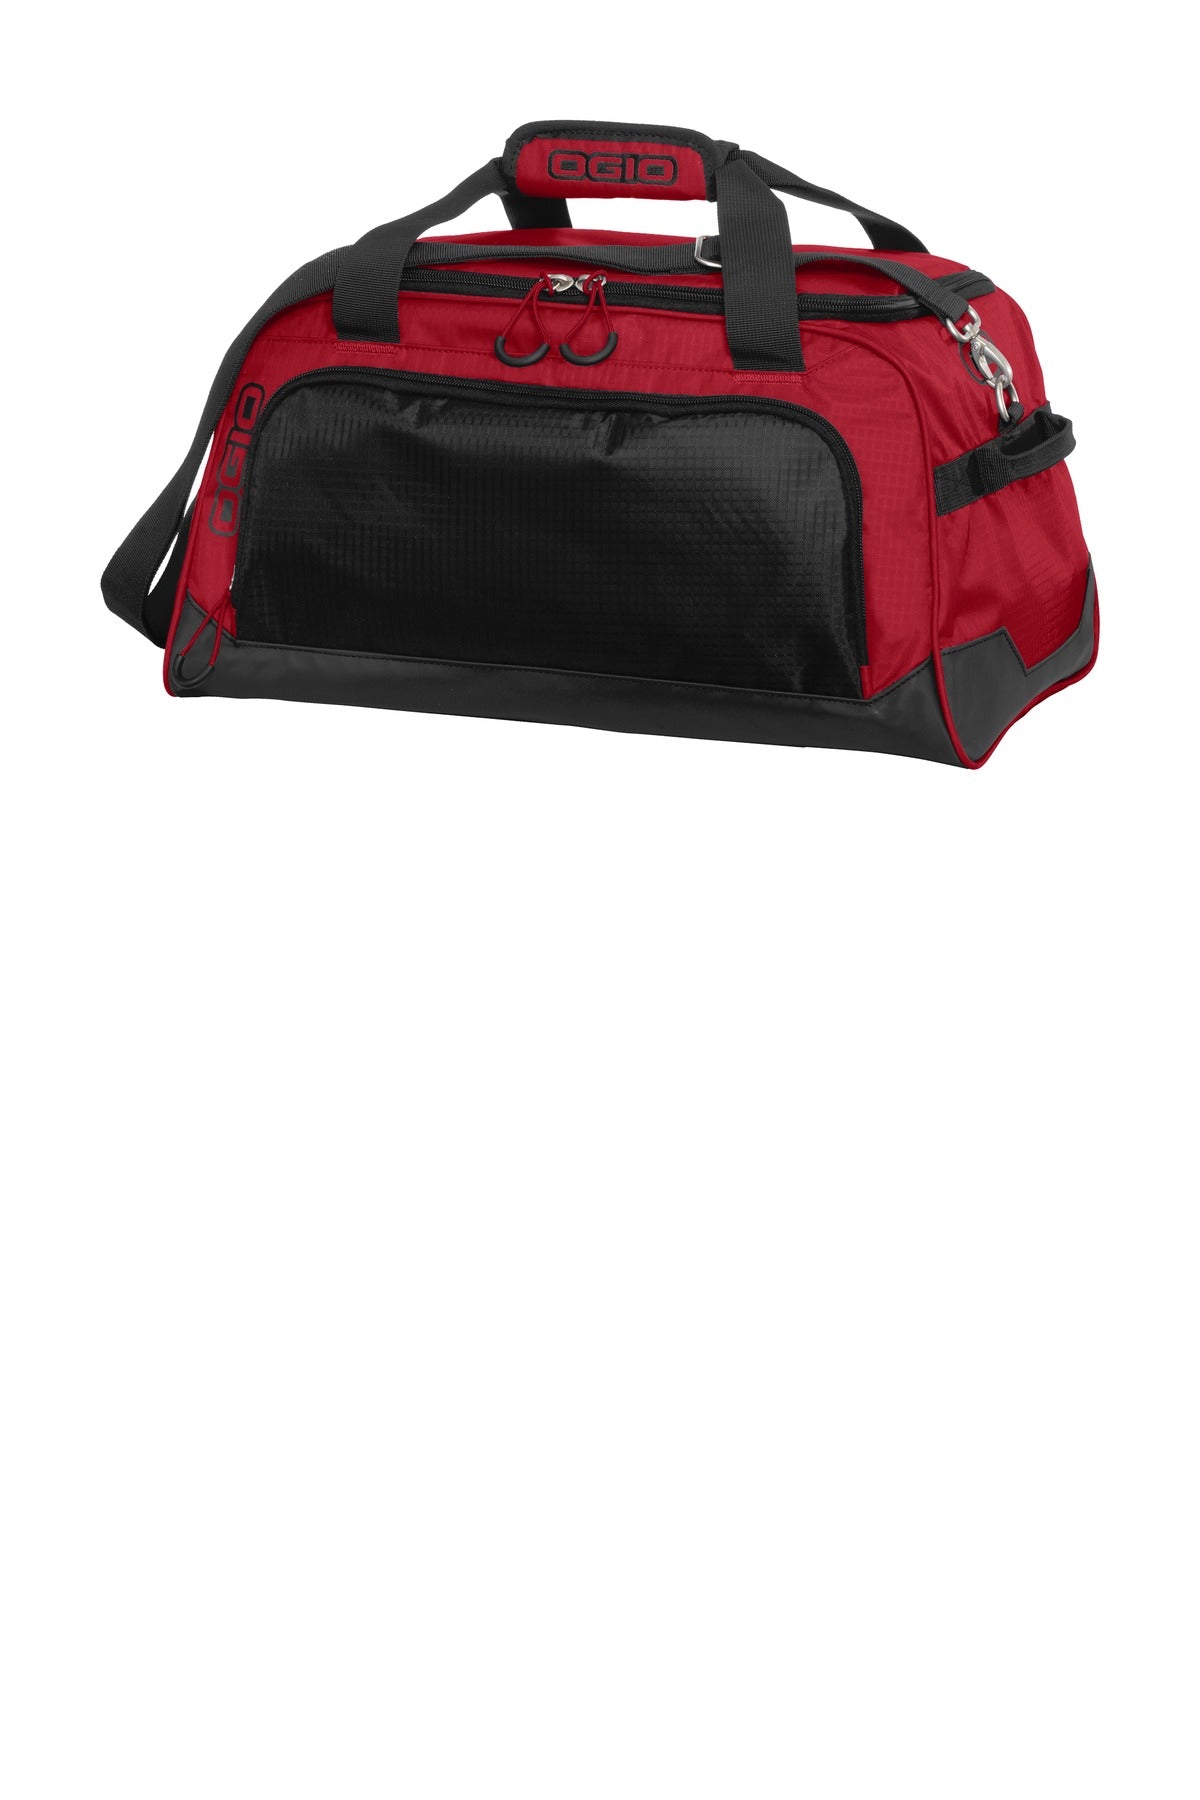 Bags Ripped Red/ Black OSFA OGIO